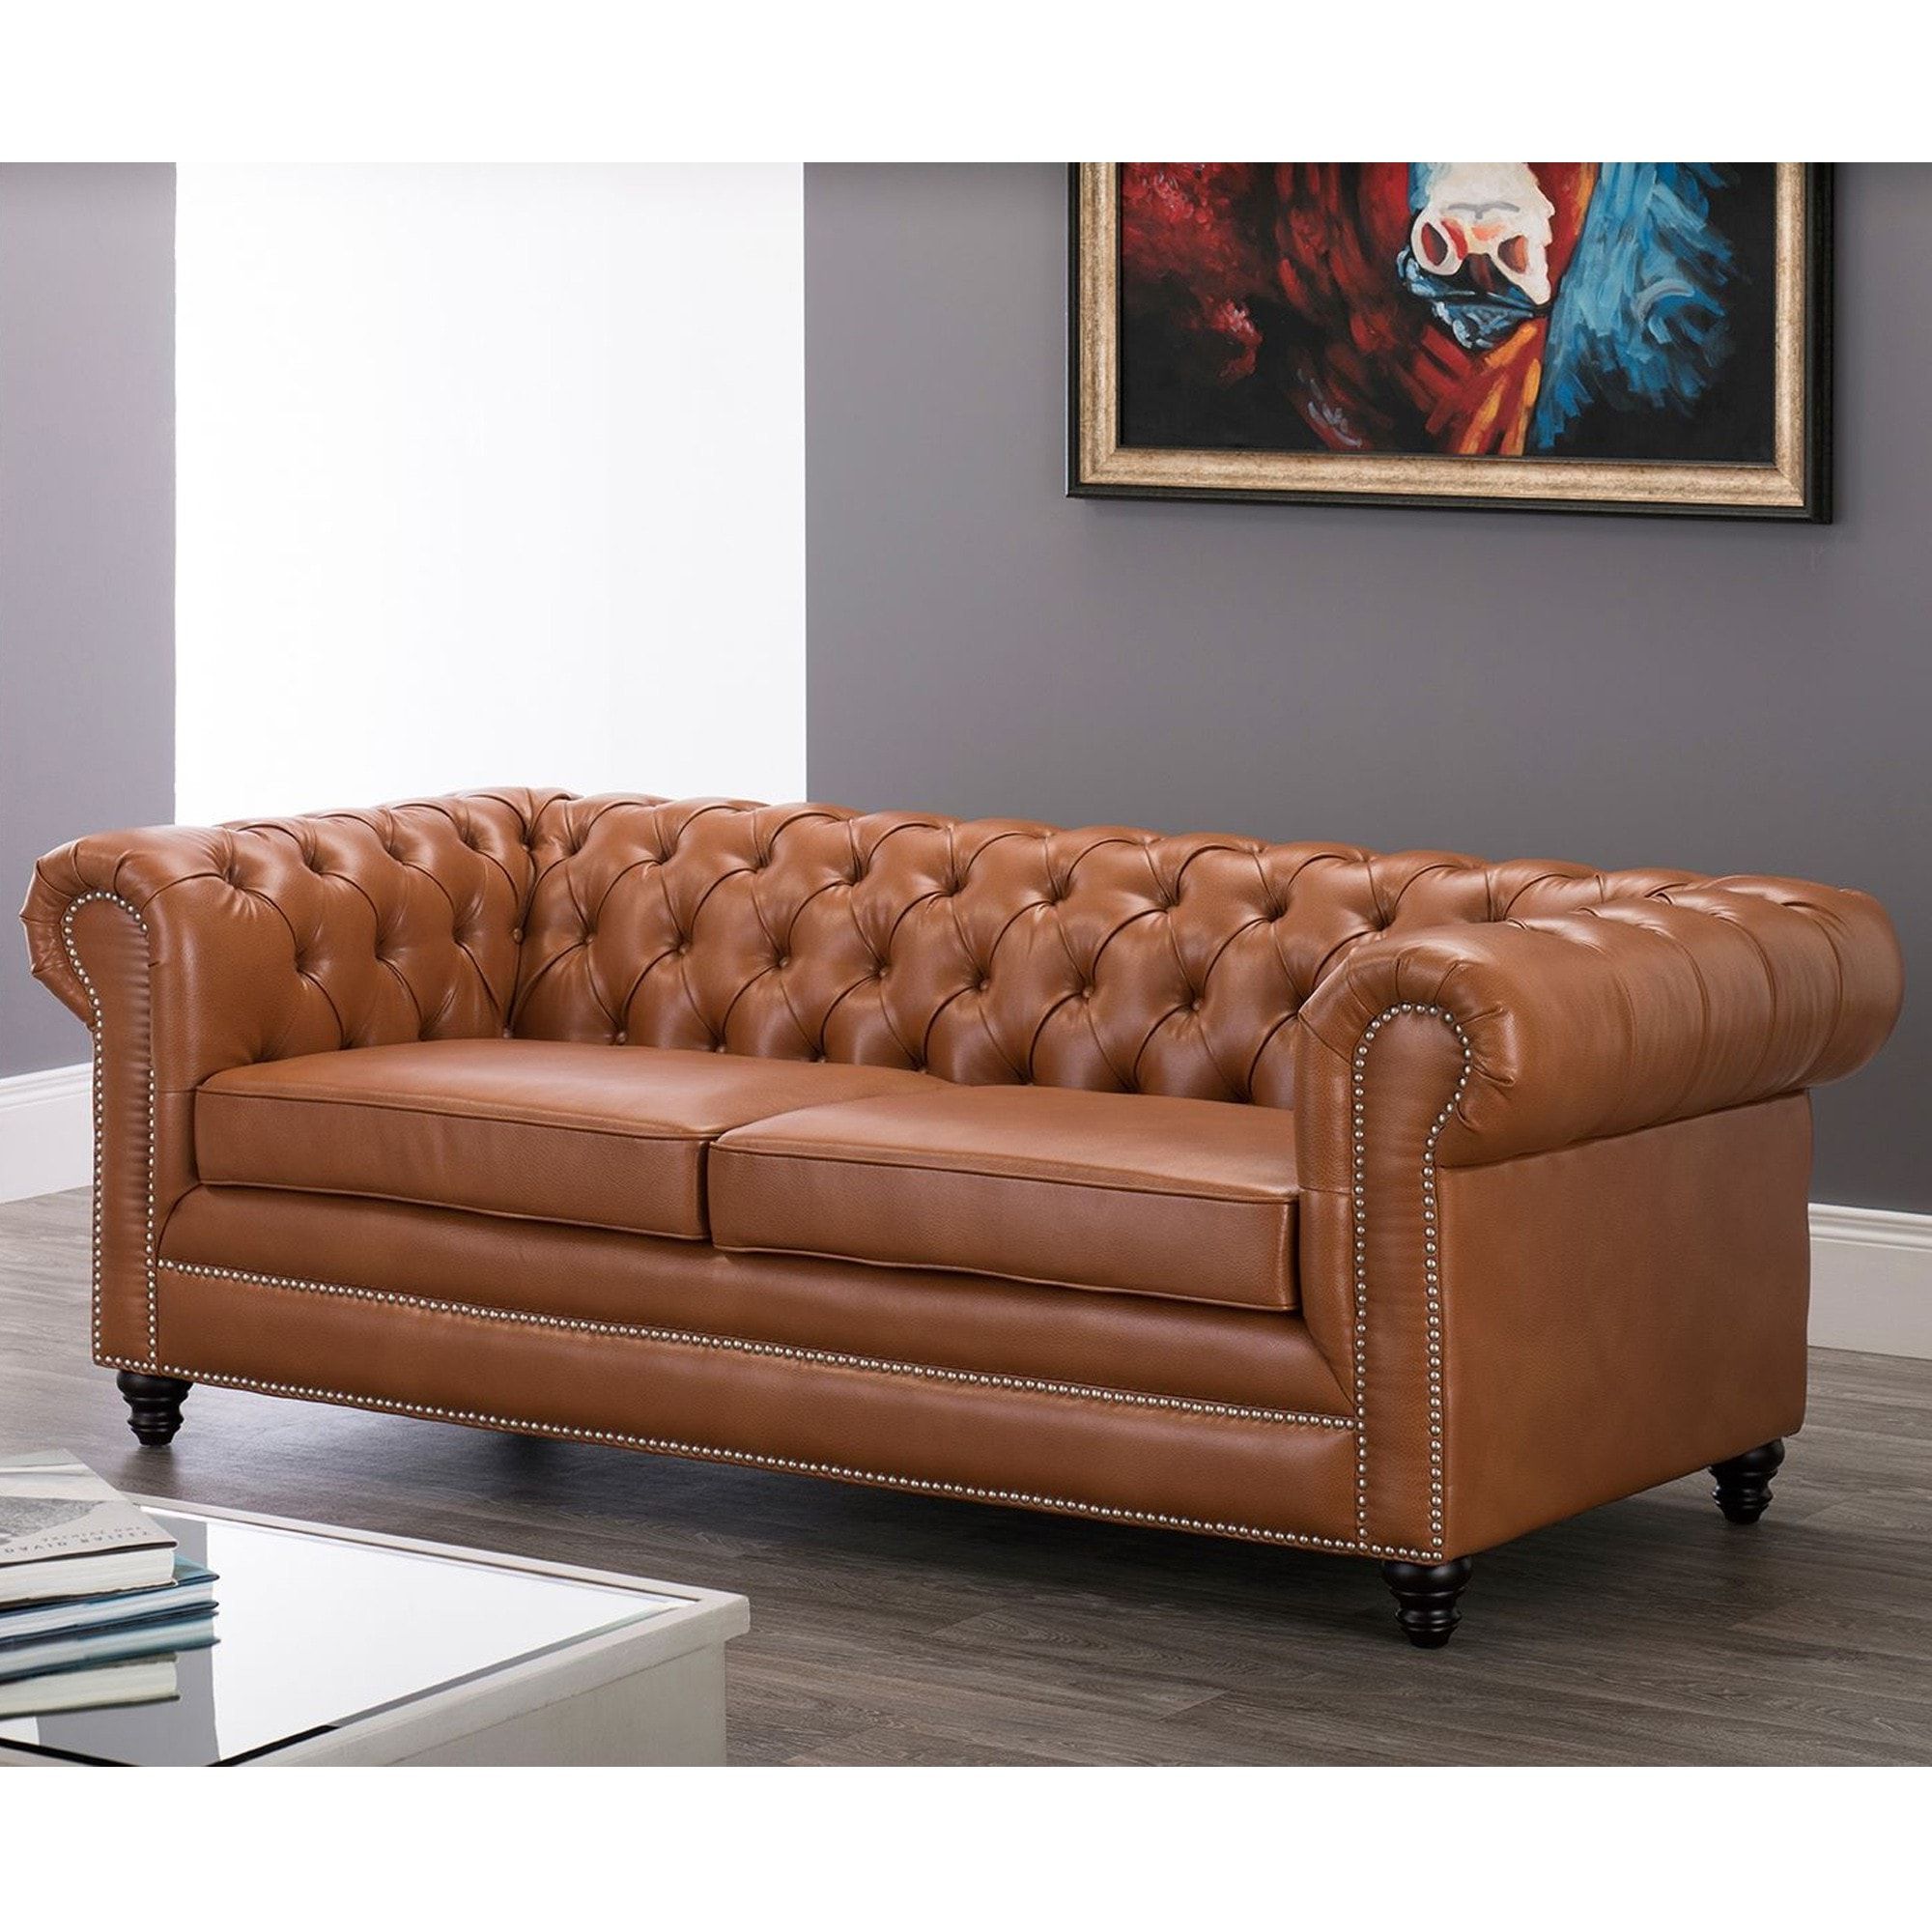 Faux Leather Chesterfield 3 Seater Sofa Tan | Tan Chesterfield Sofa Intended For Chesterfield Sofas (View 5 of 20)